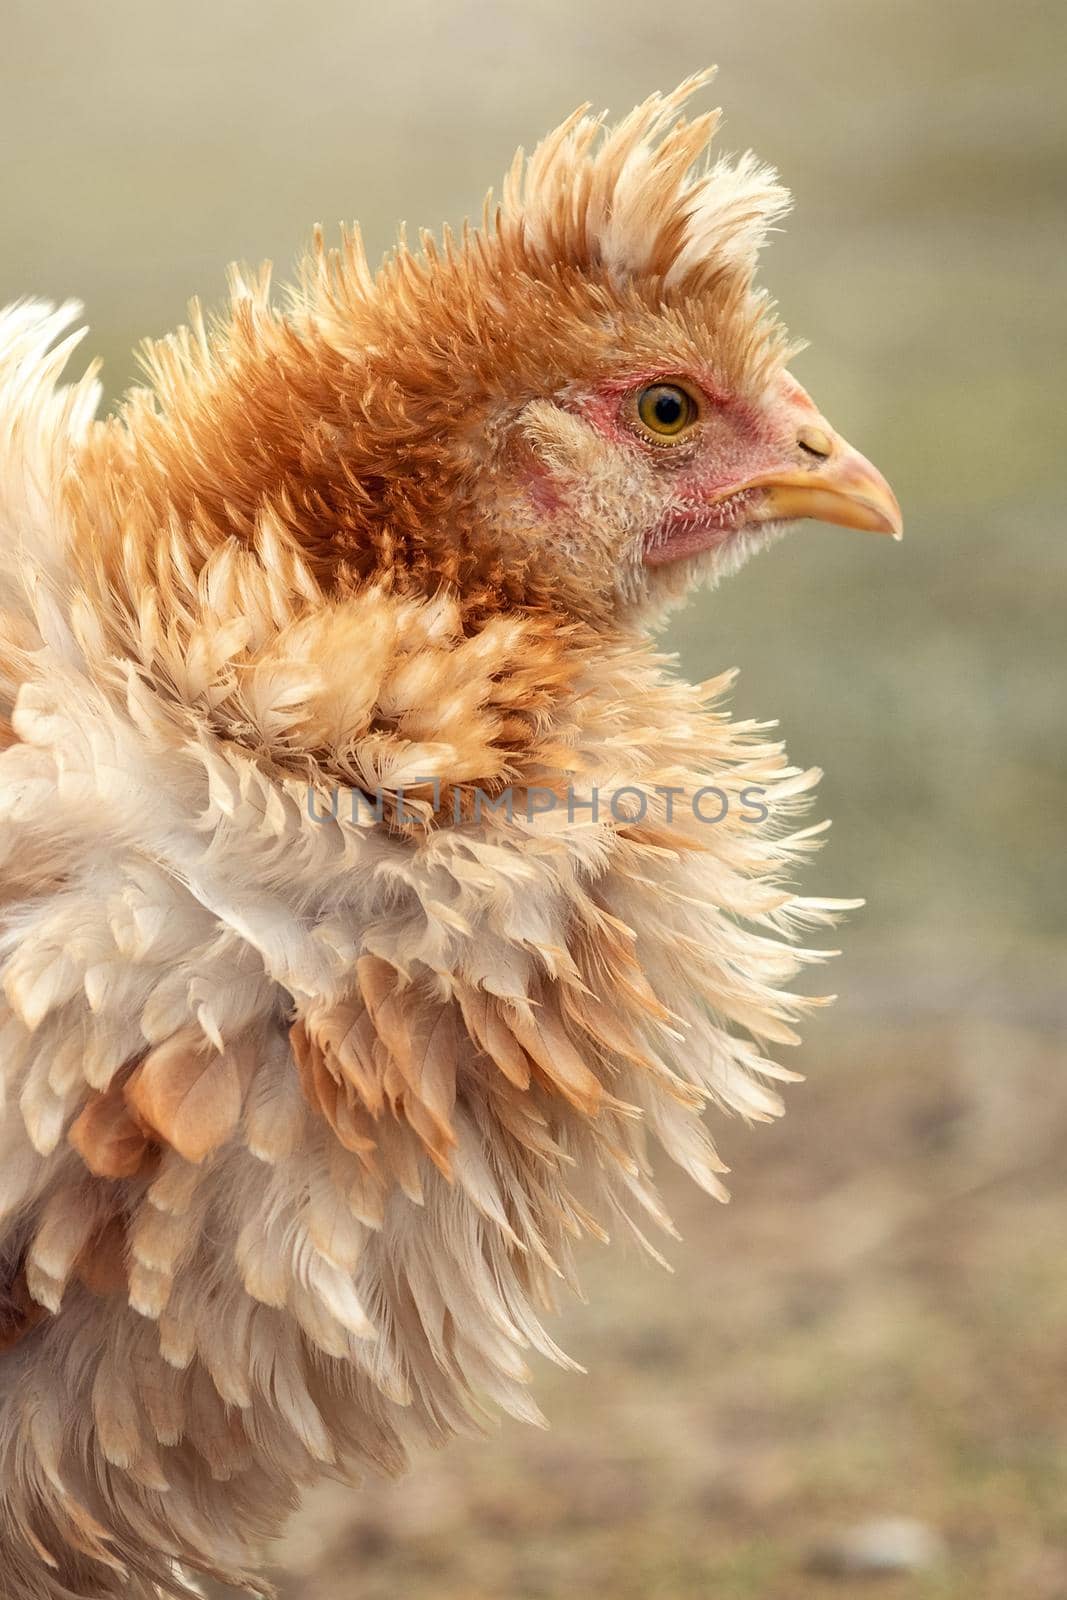 Fluffy light brown and orange colour feather young hen with tuft.  Vertical photo, close-up profile portrait.